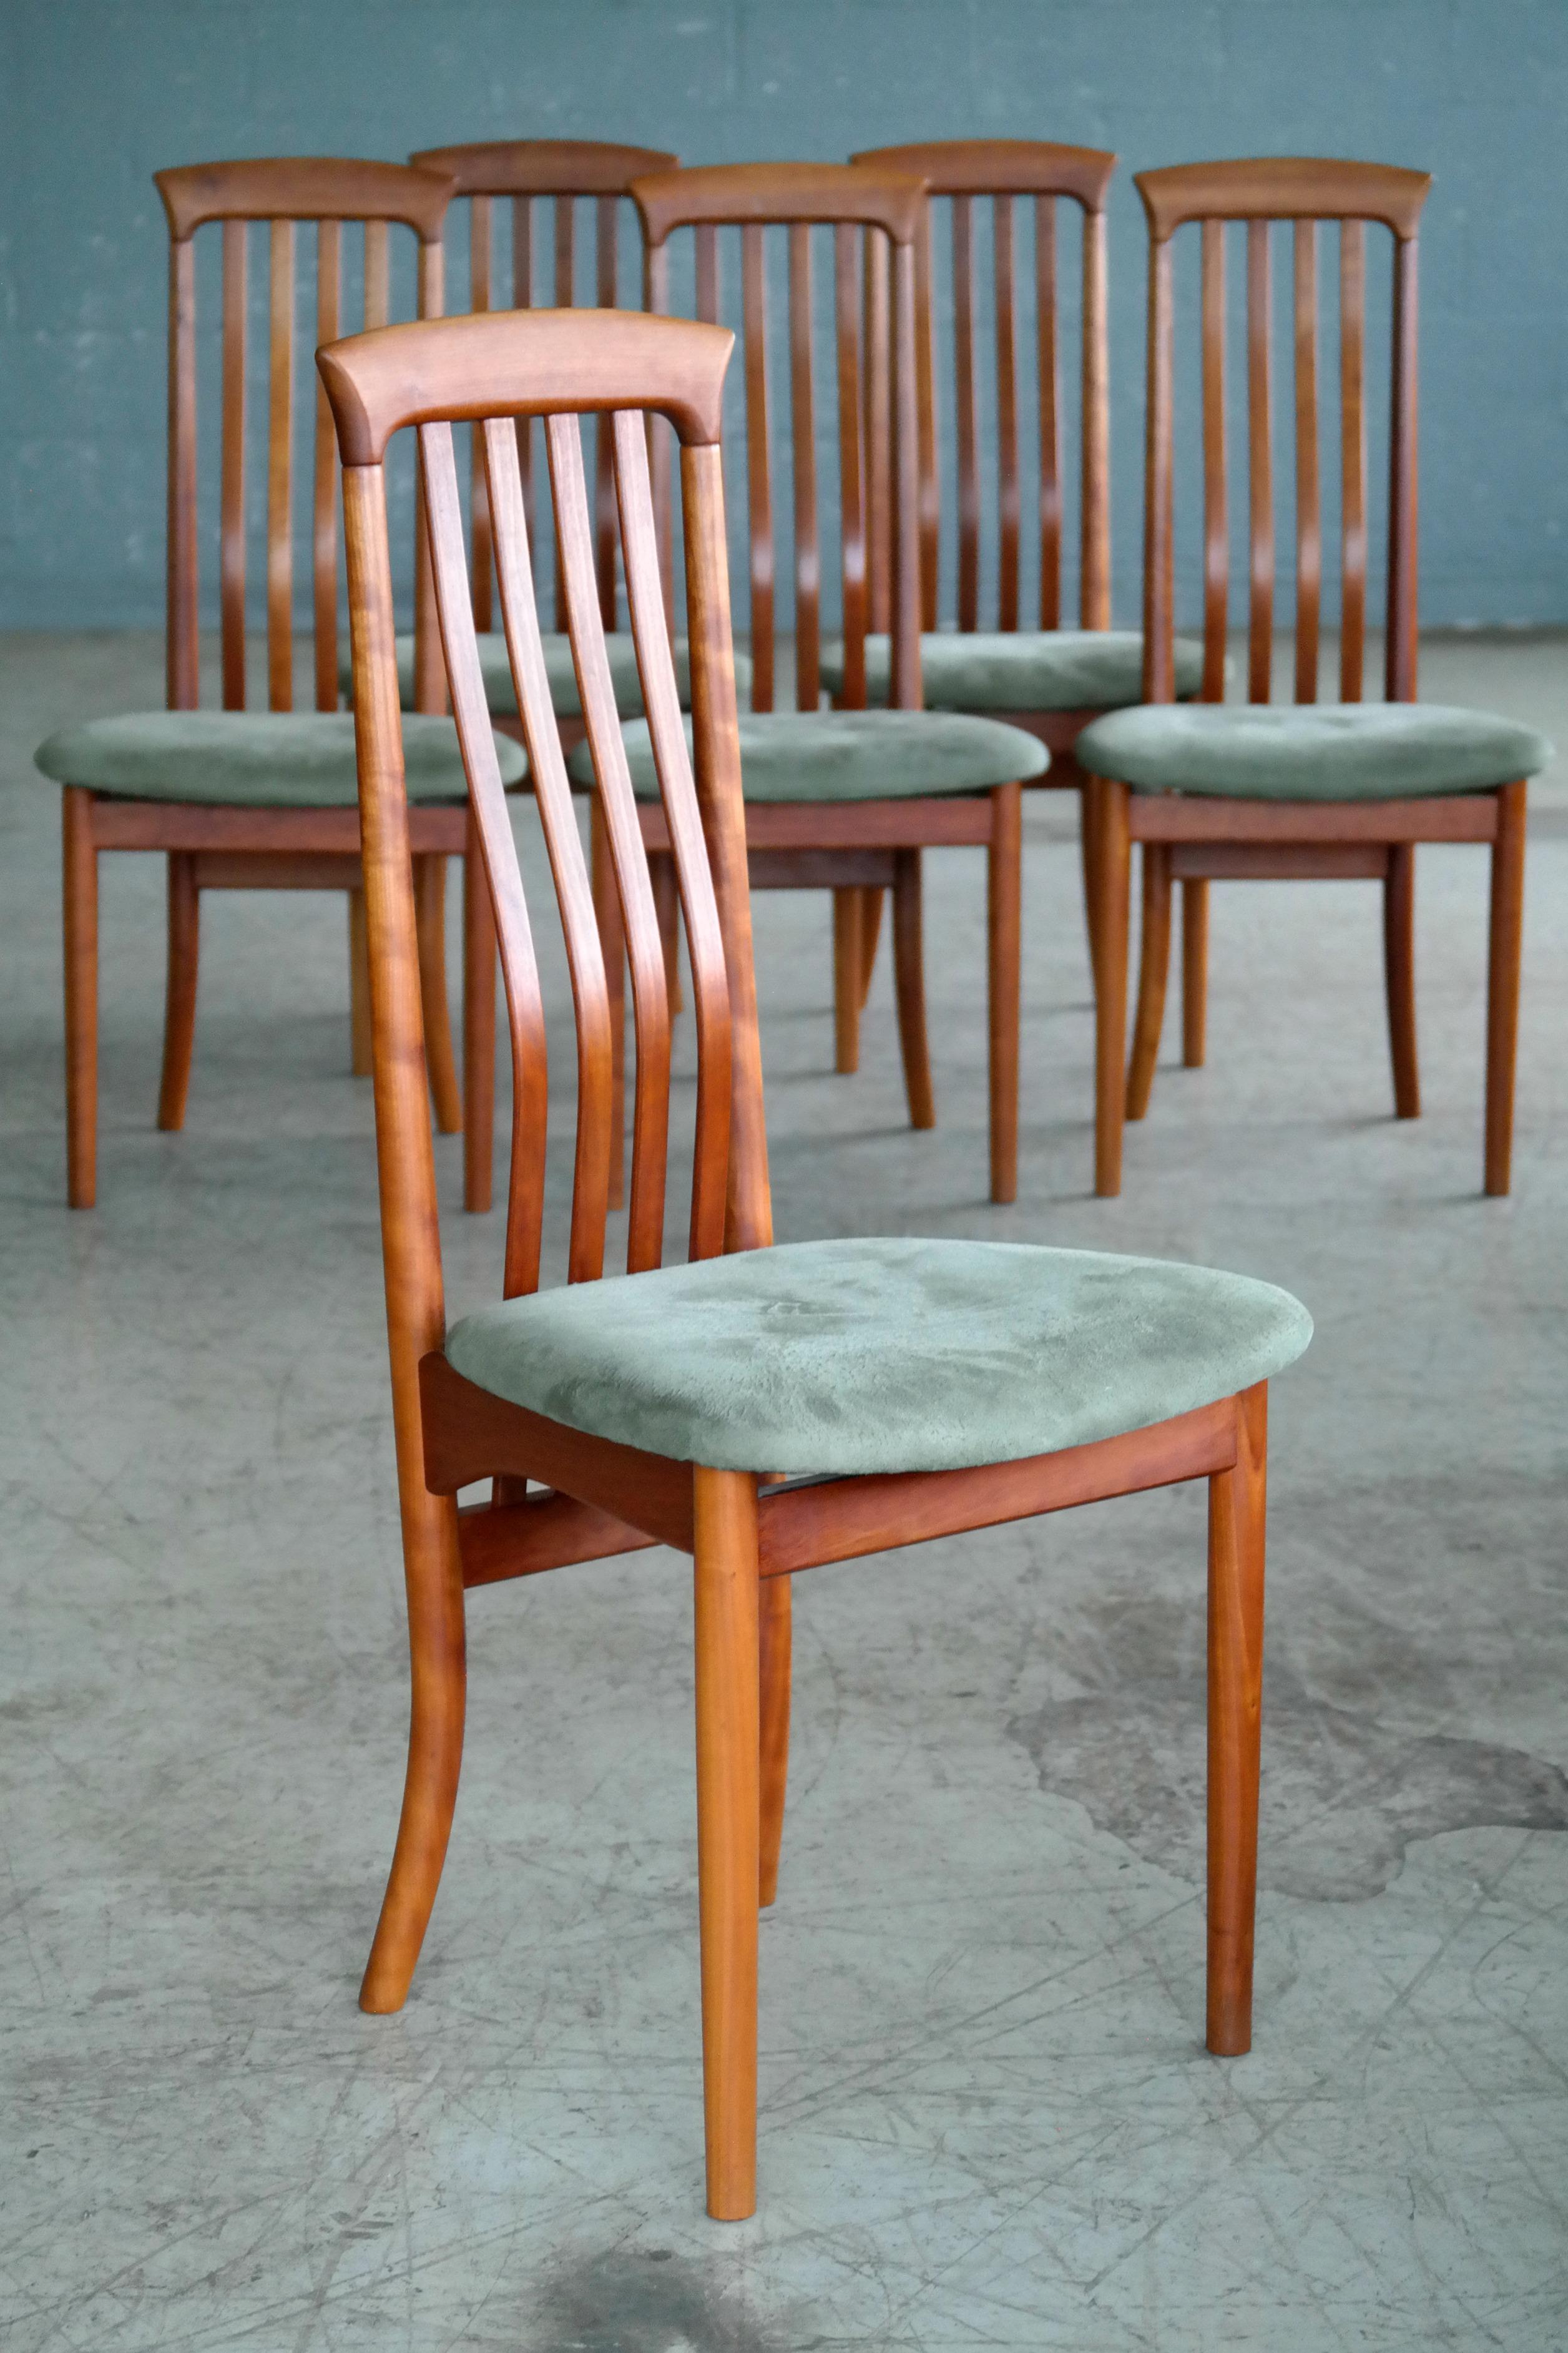 Stunning Arne Vodder style set of six highback dining chairs by Sibast Mobler. Similar in style to Niels Koefoed's Eva dining chair these chairs are labeled by Sibast one of Denmark's premier furniture makers and a producer for Arne Vodder and other